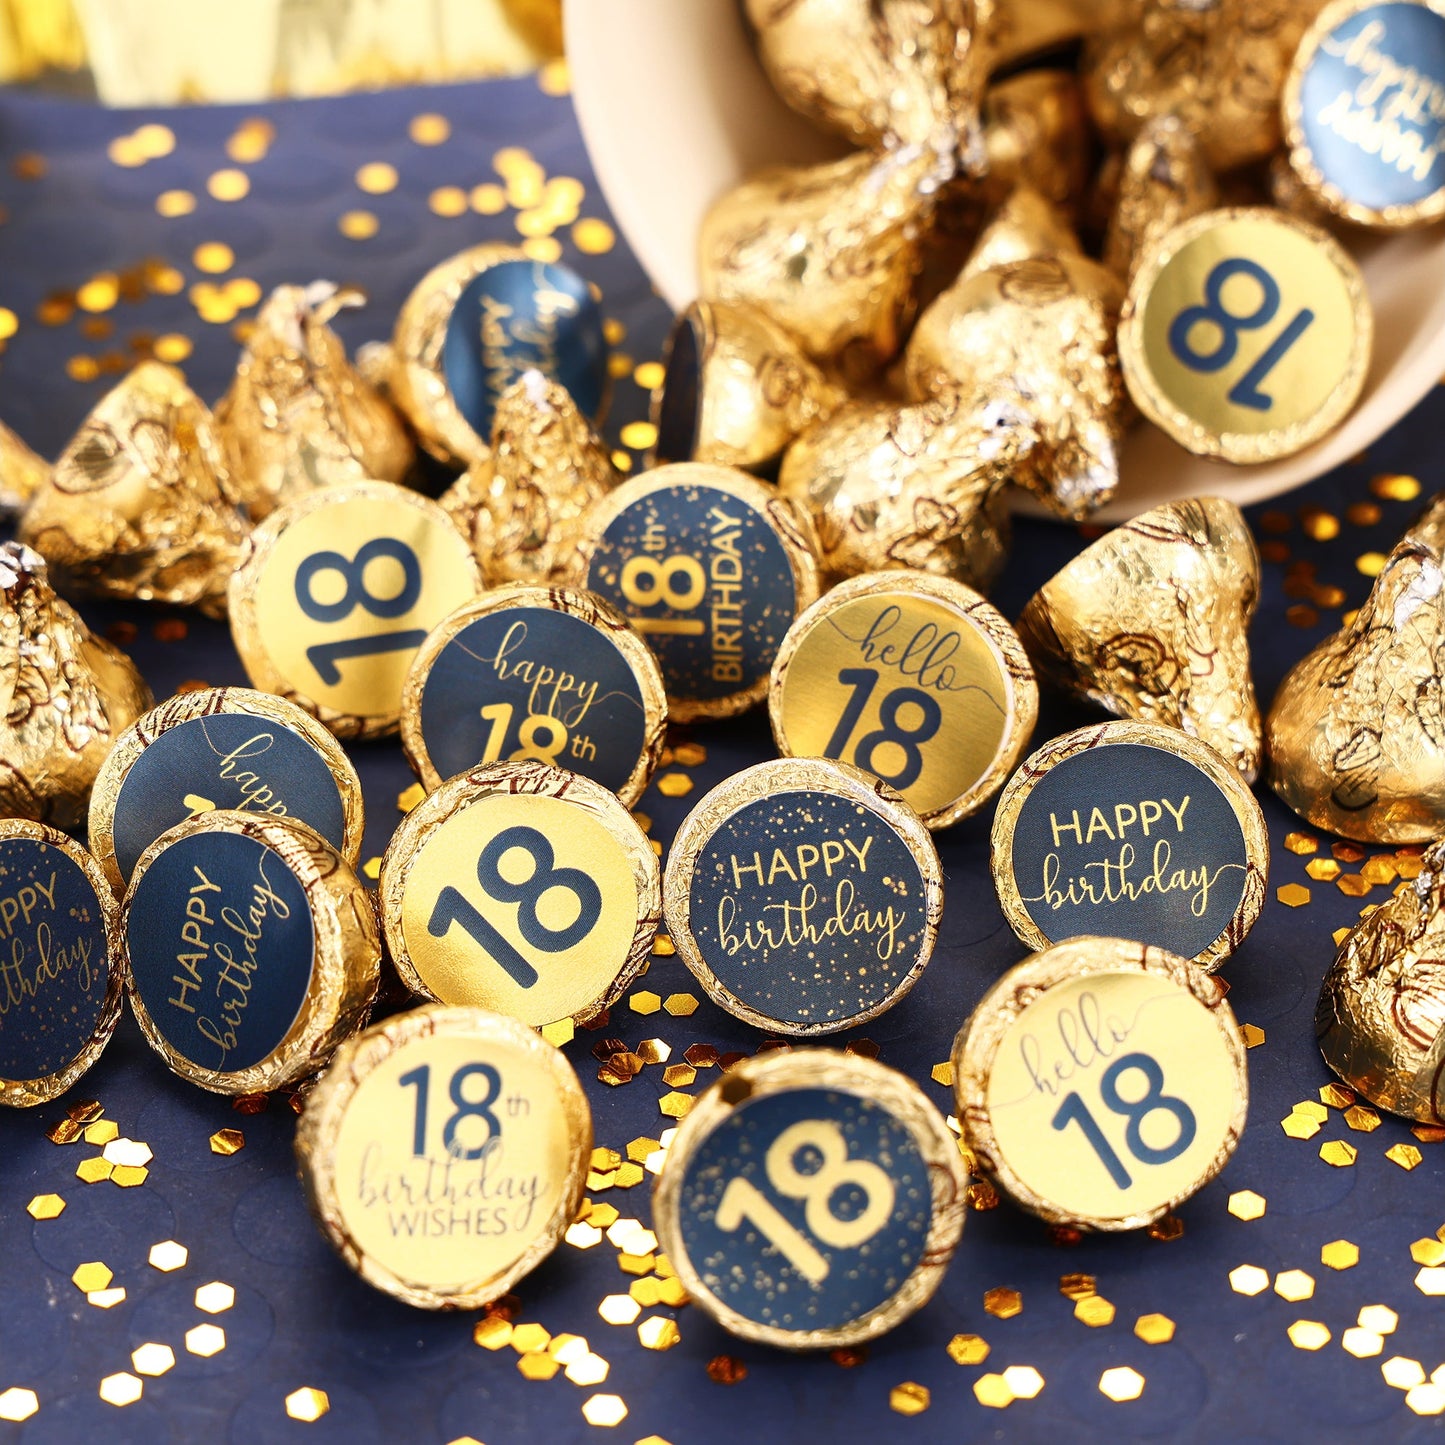 Premium navy blue and gold foil stickers perfect for decorating Hershey's Kisses for an 100th birthday party